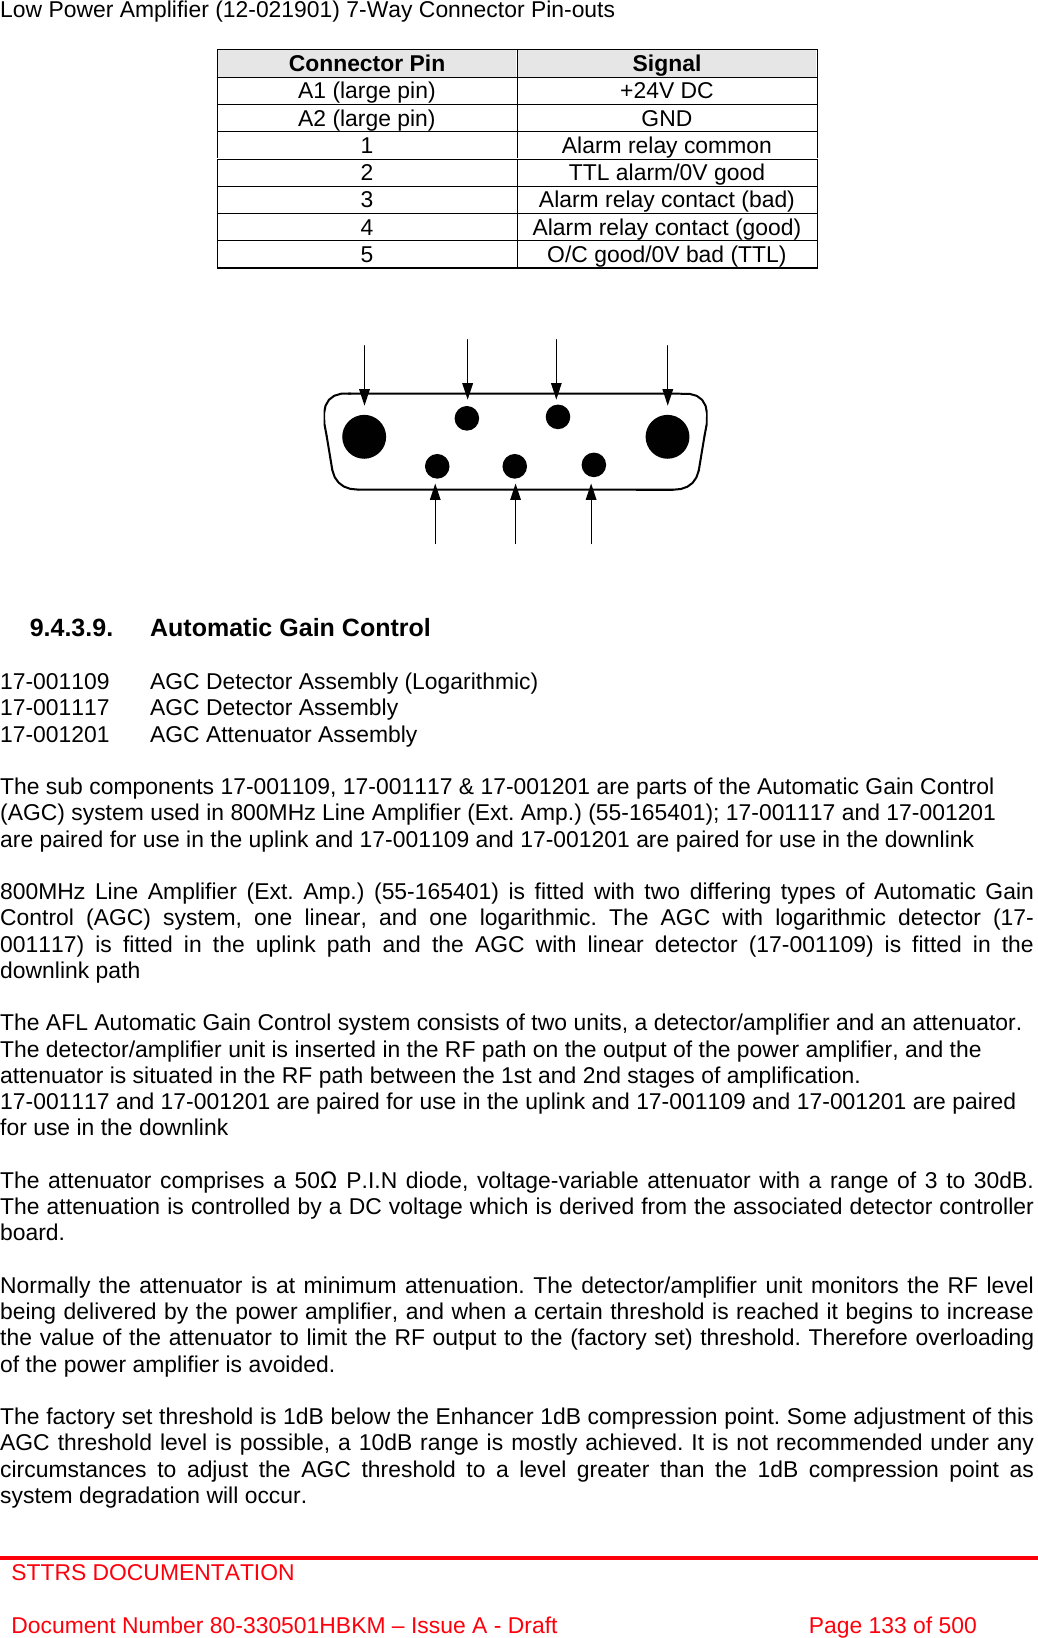 STTRS DOCUMENTATION  Document Number 80-330501HBKM – Issue A - Draft  Page 133 of 500   Low Power Amplifier (12-021901) 7-Way Connector Pin-outs  Connector Pin  Signal A1 (large pin)  +24V DC A2 (large pin)  GND 1  Alarm relay common 2  TTL alarm/0V good 3  Alarm relay contact (bad) 4  Alarm relay contact (good) 5  O/C good/0V bad (TTL)              9.4.3.9.  Automatic Gain Control  17-001109  AGC Detector Assembly (Logarithmic) 17-001117  AGC Detector Assembly  17-001201  AGC Attenuator Assembly   The sub components 17-001109, 17-001117 &amp; 17-001201 are parts of the Automatic Gain Control (AGC) system used in 800MHz Line Amplifier (Ext. Amp.) (55-165401); 17-001117 and 17-001201 are paired for use in the uplink and 17-001109 and 17-001201 are paired for use in the downlink  800MHz Line Amplifier (Ext. Amp.) (55-165401) is fitted with two differing types of Automatic Gain Control (AGC) system, one linear, and one logarithmic. The AGC with logarithmic detector (17-001117) is fitted in the uplink path and the AGC with linear detector (17-001109) is fitted in the downlink path   The AFL Automatic Gain Control system consists of two units, a detector/amplifier and an attenuator. The detector/amplifier unit is inserted in the RF path on the output of the power amplifier, and the attenuator is situated in the RF path between the 1st and 2nd stages of amplification.  17-001117 and 17-001201 are paired for use in the uplink and 17-001109 and 17-001201 are paired for use in the downlink  The attenuator comprises a 50Ω P.I.N diode, voltage-variable attenuator with a range of 3 to 30dB. The attenuation is controlled by a DC voltage which is derived from the associated detector controller board.  Normally the attenuator is at minimum attenuation. The detector/amplifier unit monitors the RF level being delivered by the power amplifier, and when a certain threshold is reached it begins to increase the value of the attenuator to limit the RF output to the (factory set) threshold. Therefore overloading of the power amplifier is avoided.  The factory set threshold is 1dB below the Enhancer 1dB compression point. Some adjustment of this AGC threshold level is possible, a 10dB range is mostly achieved. It is not recommended under any circumstances to adjust the AGC threshold to a level greater than the 1dB compression point as system degradation will occur. 